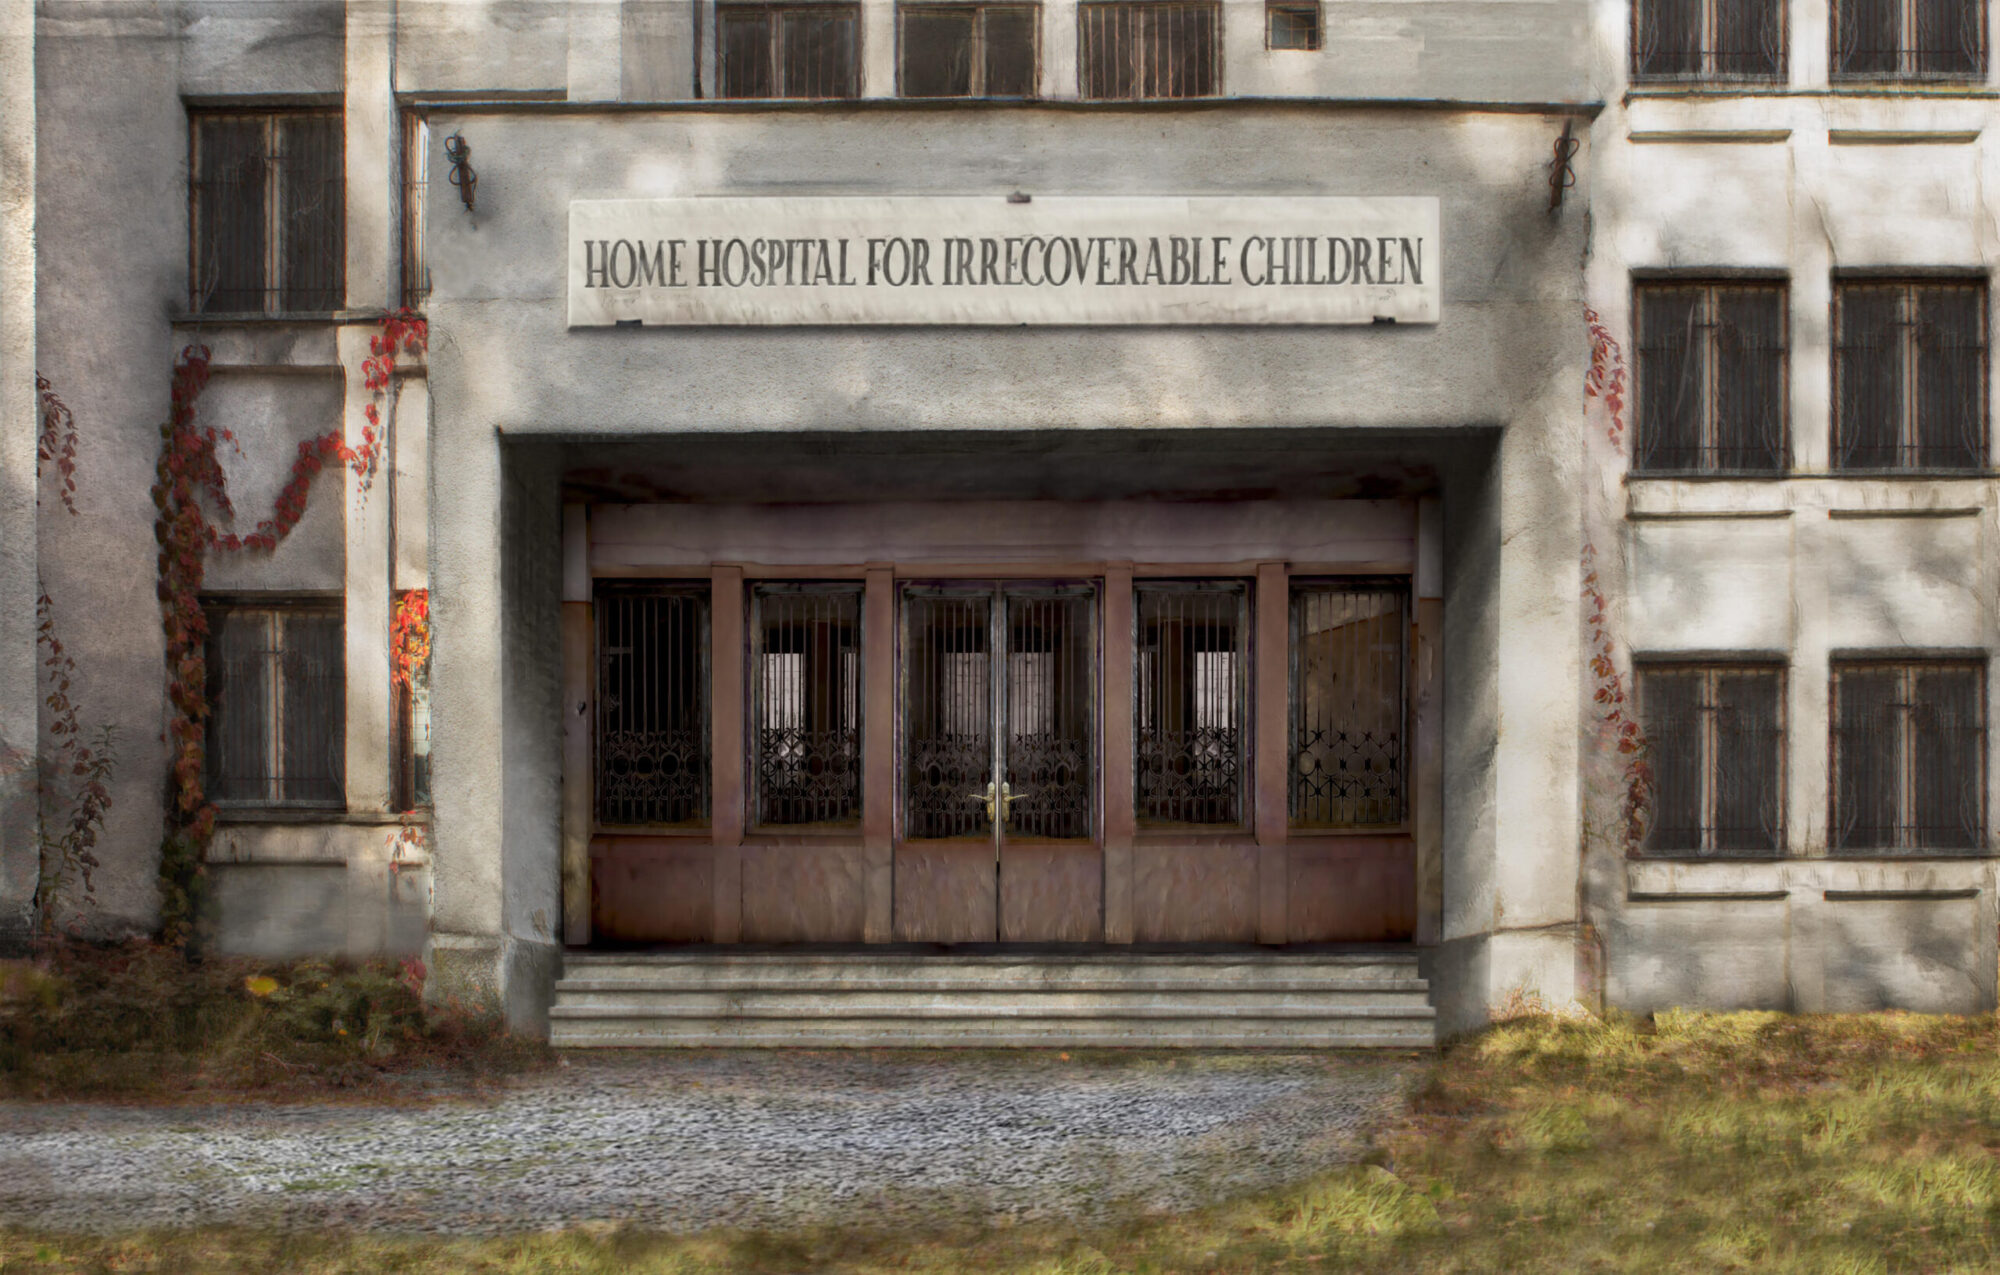 Above a dilapidated building's huge entrance hangs a sign that reads "Home Hospital for Irrecoverable Chidlren".